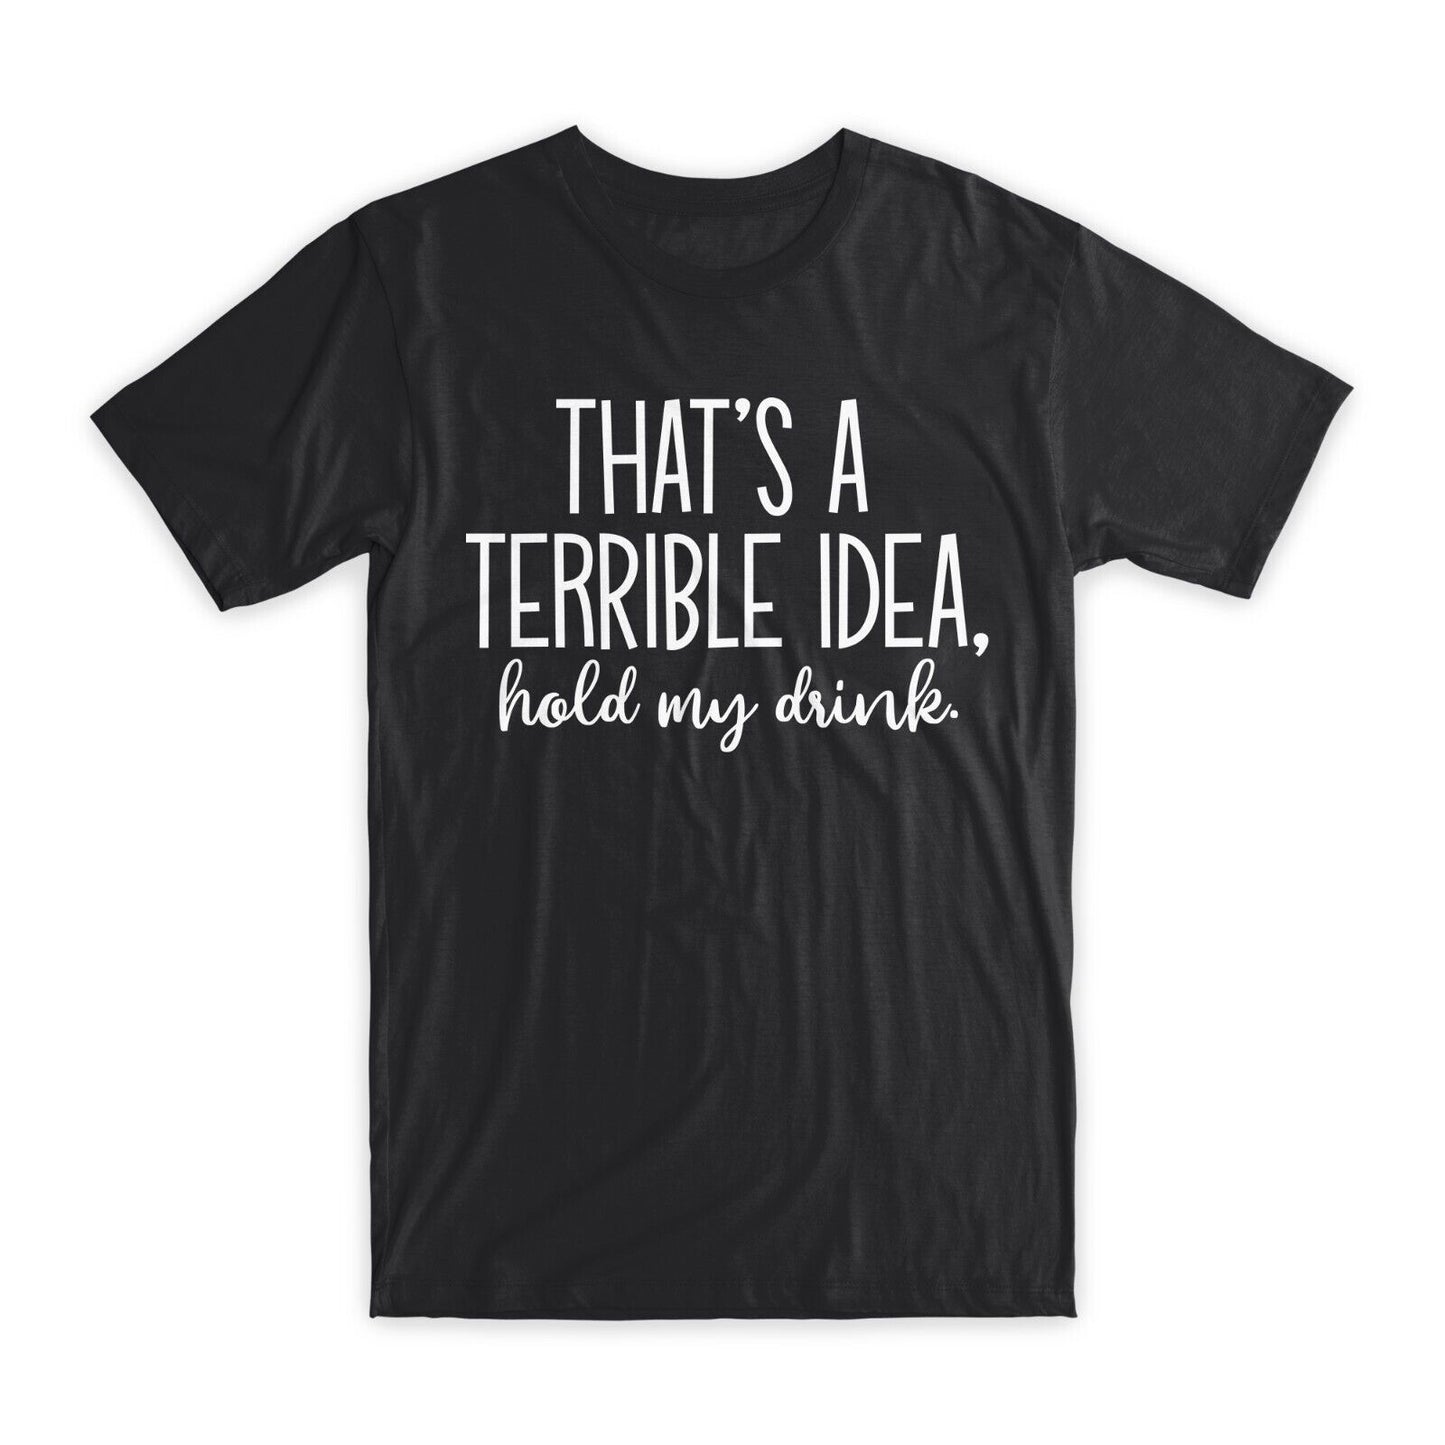 That's A Terrible Idea T-Shirt Premium Soft Cotton Crew Neck Funny Tee Gifts NEW